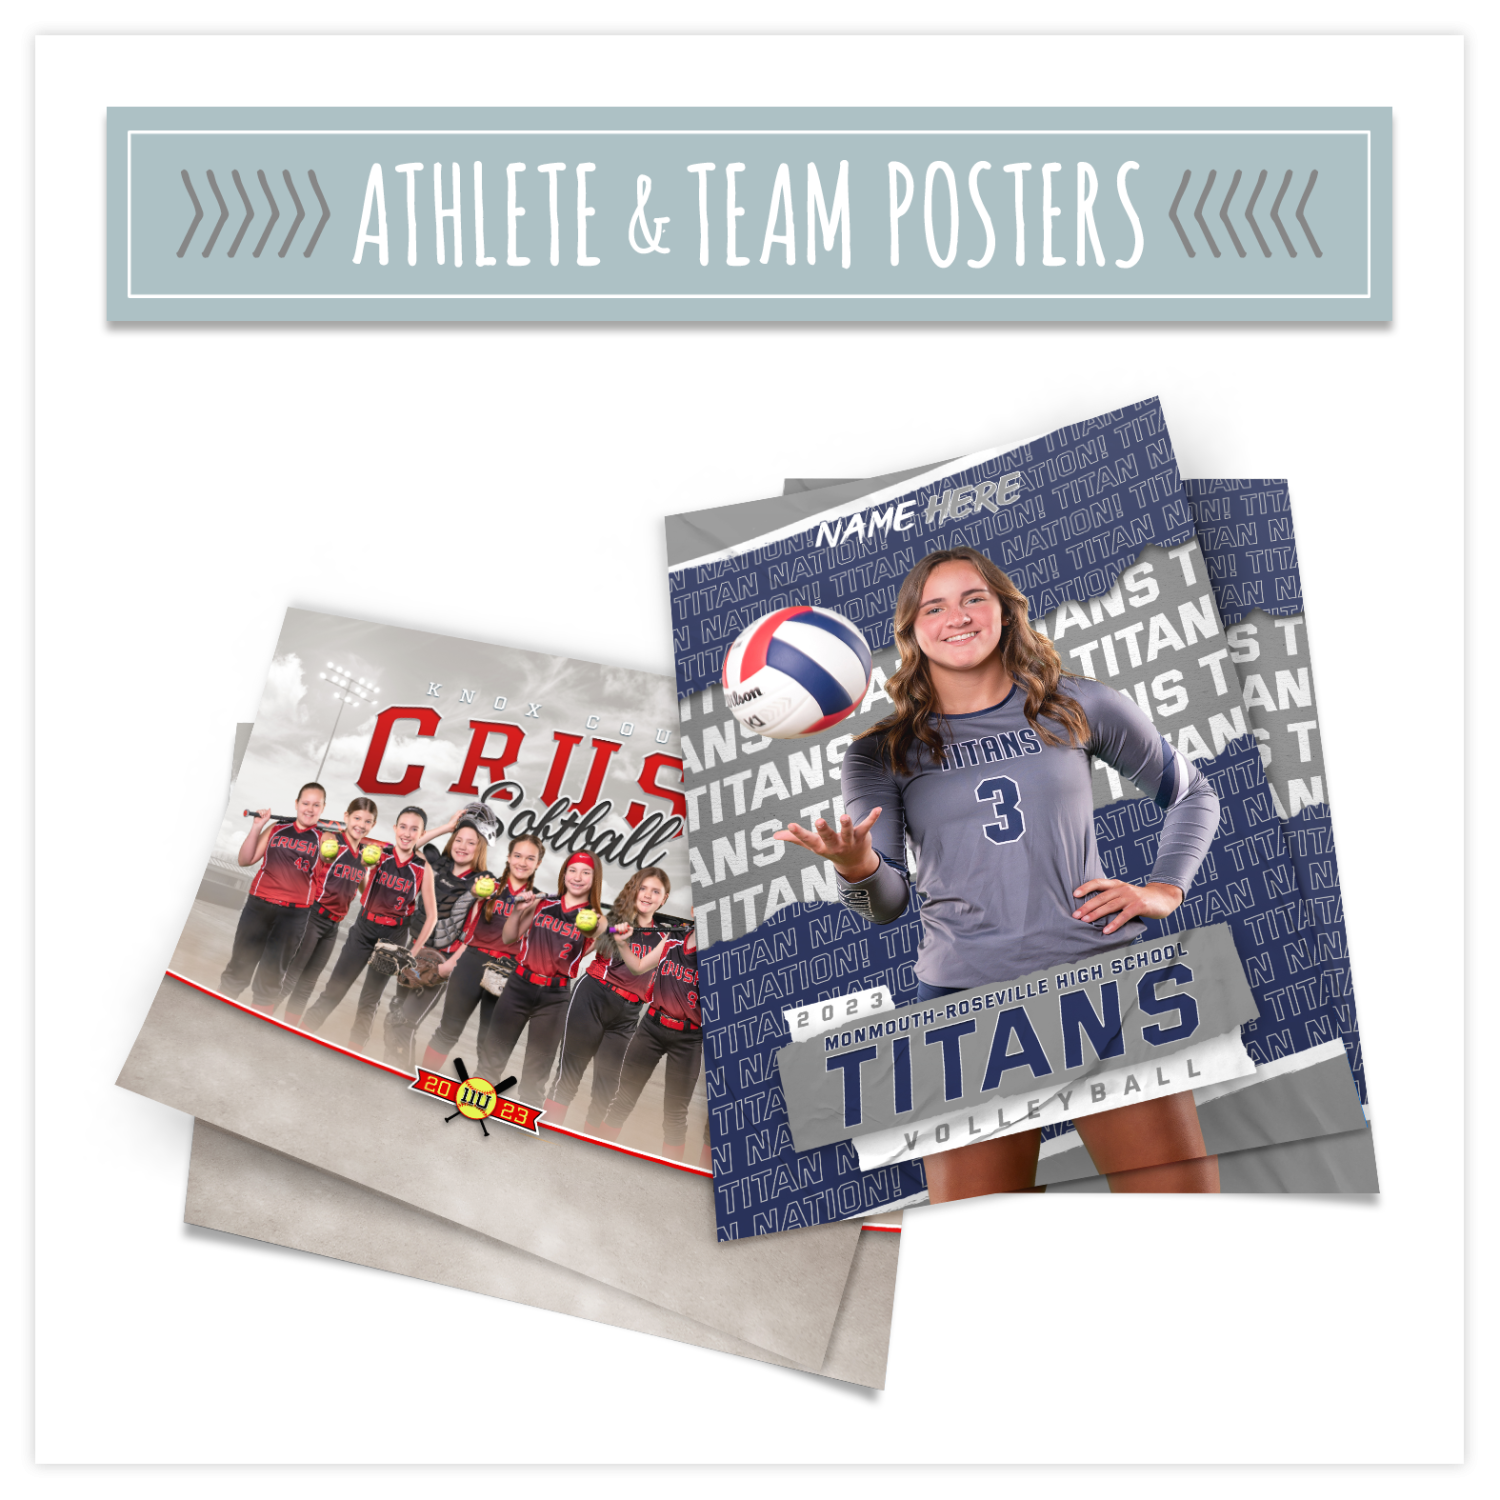 ATHLETE and TEAM POSTERS